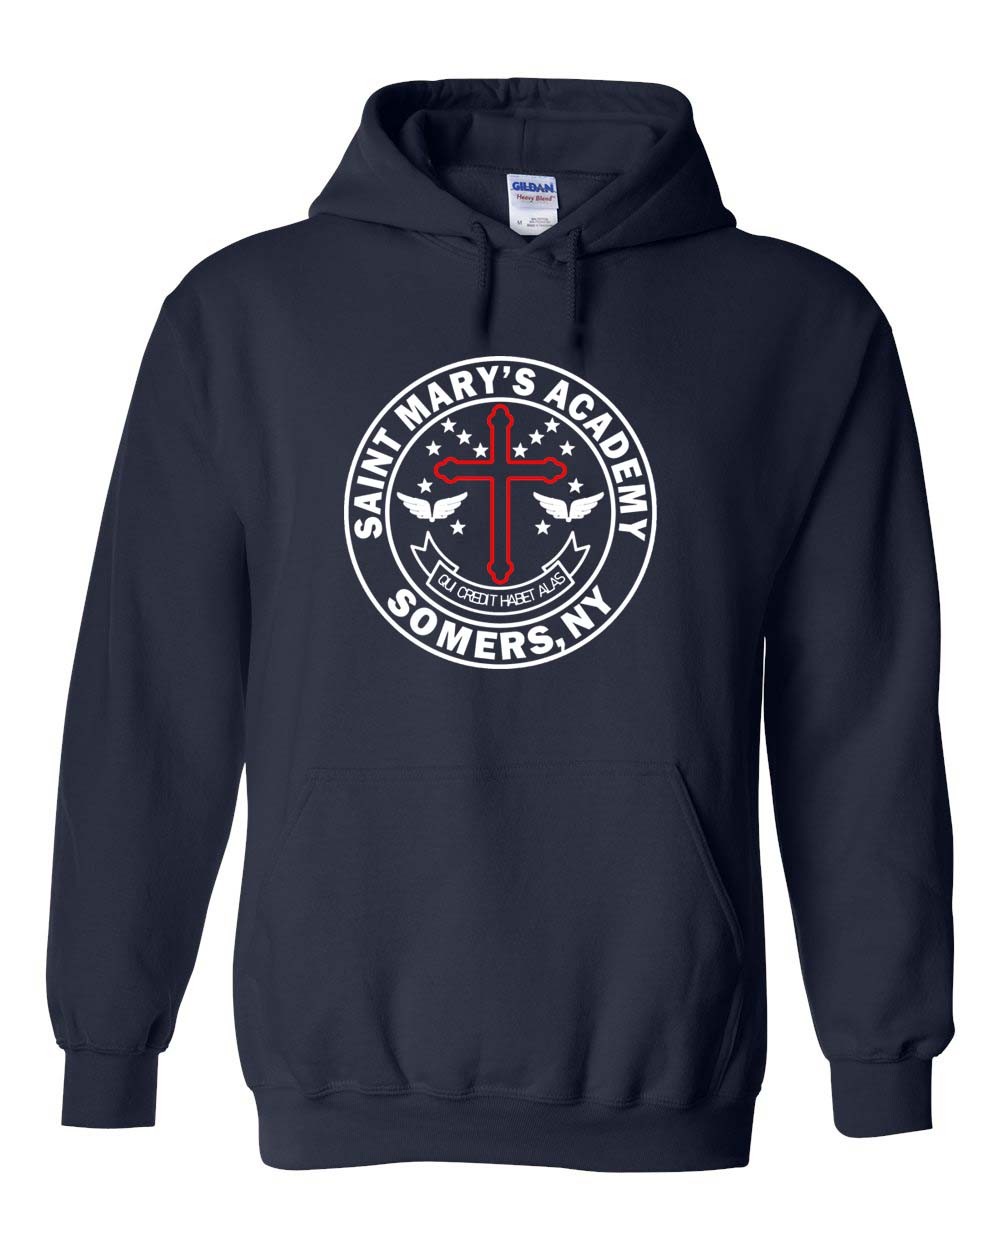 SMA Spirit Hoodie w/ Crest Logo - Please allow 2-3 Weeks for Delivery